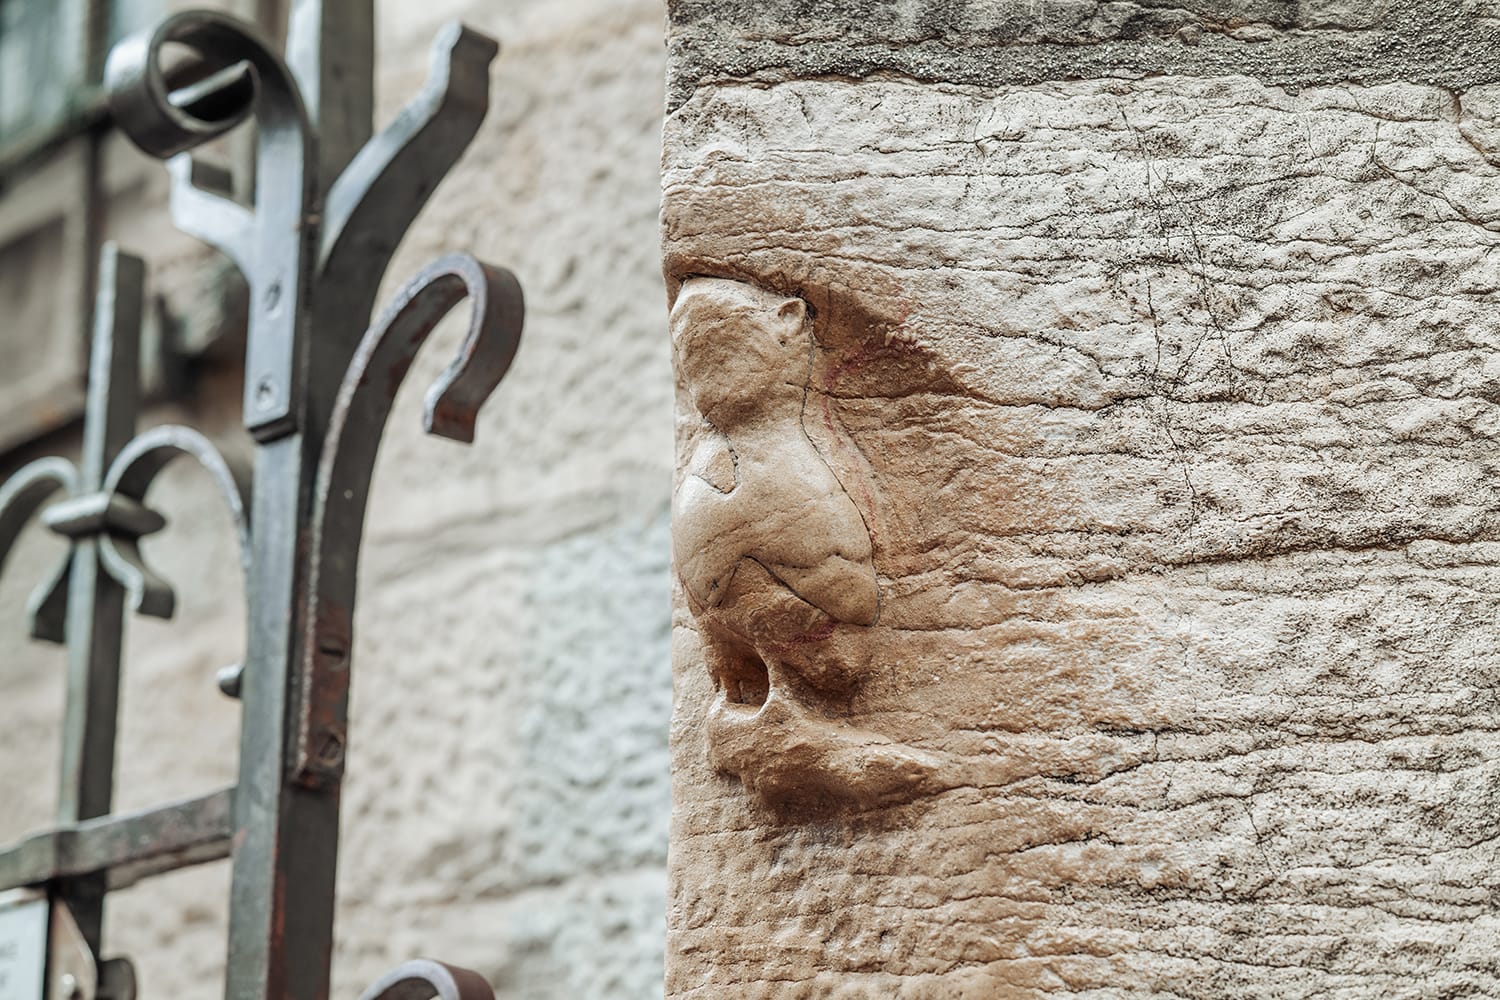 Magic Owl carved in relief on north wall of Eglise Notre-Dame de Dijon, France